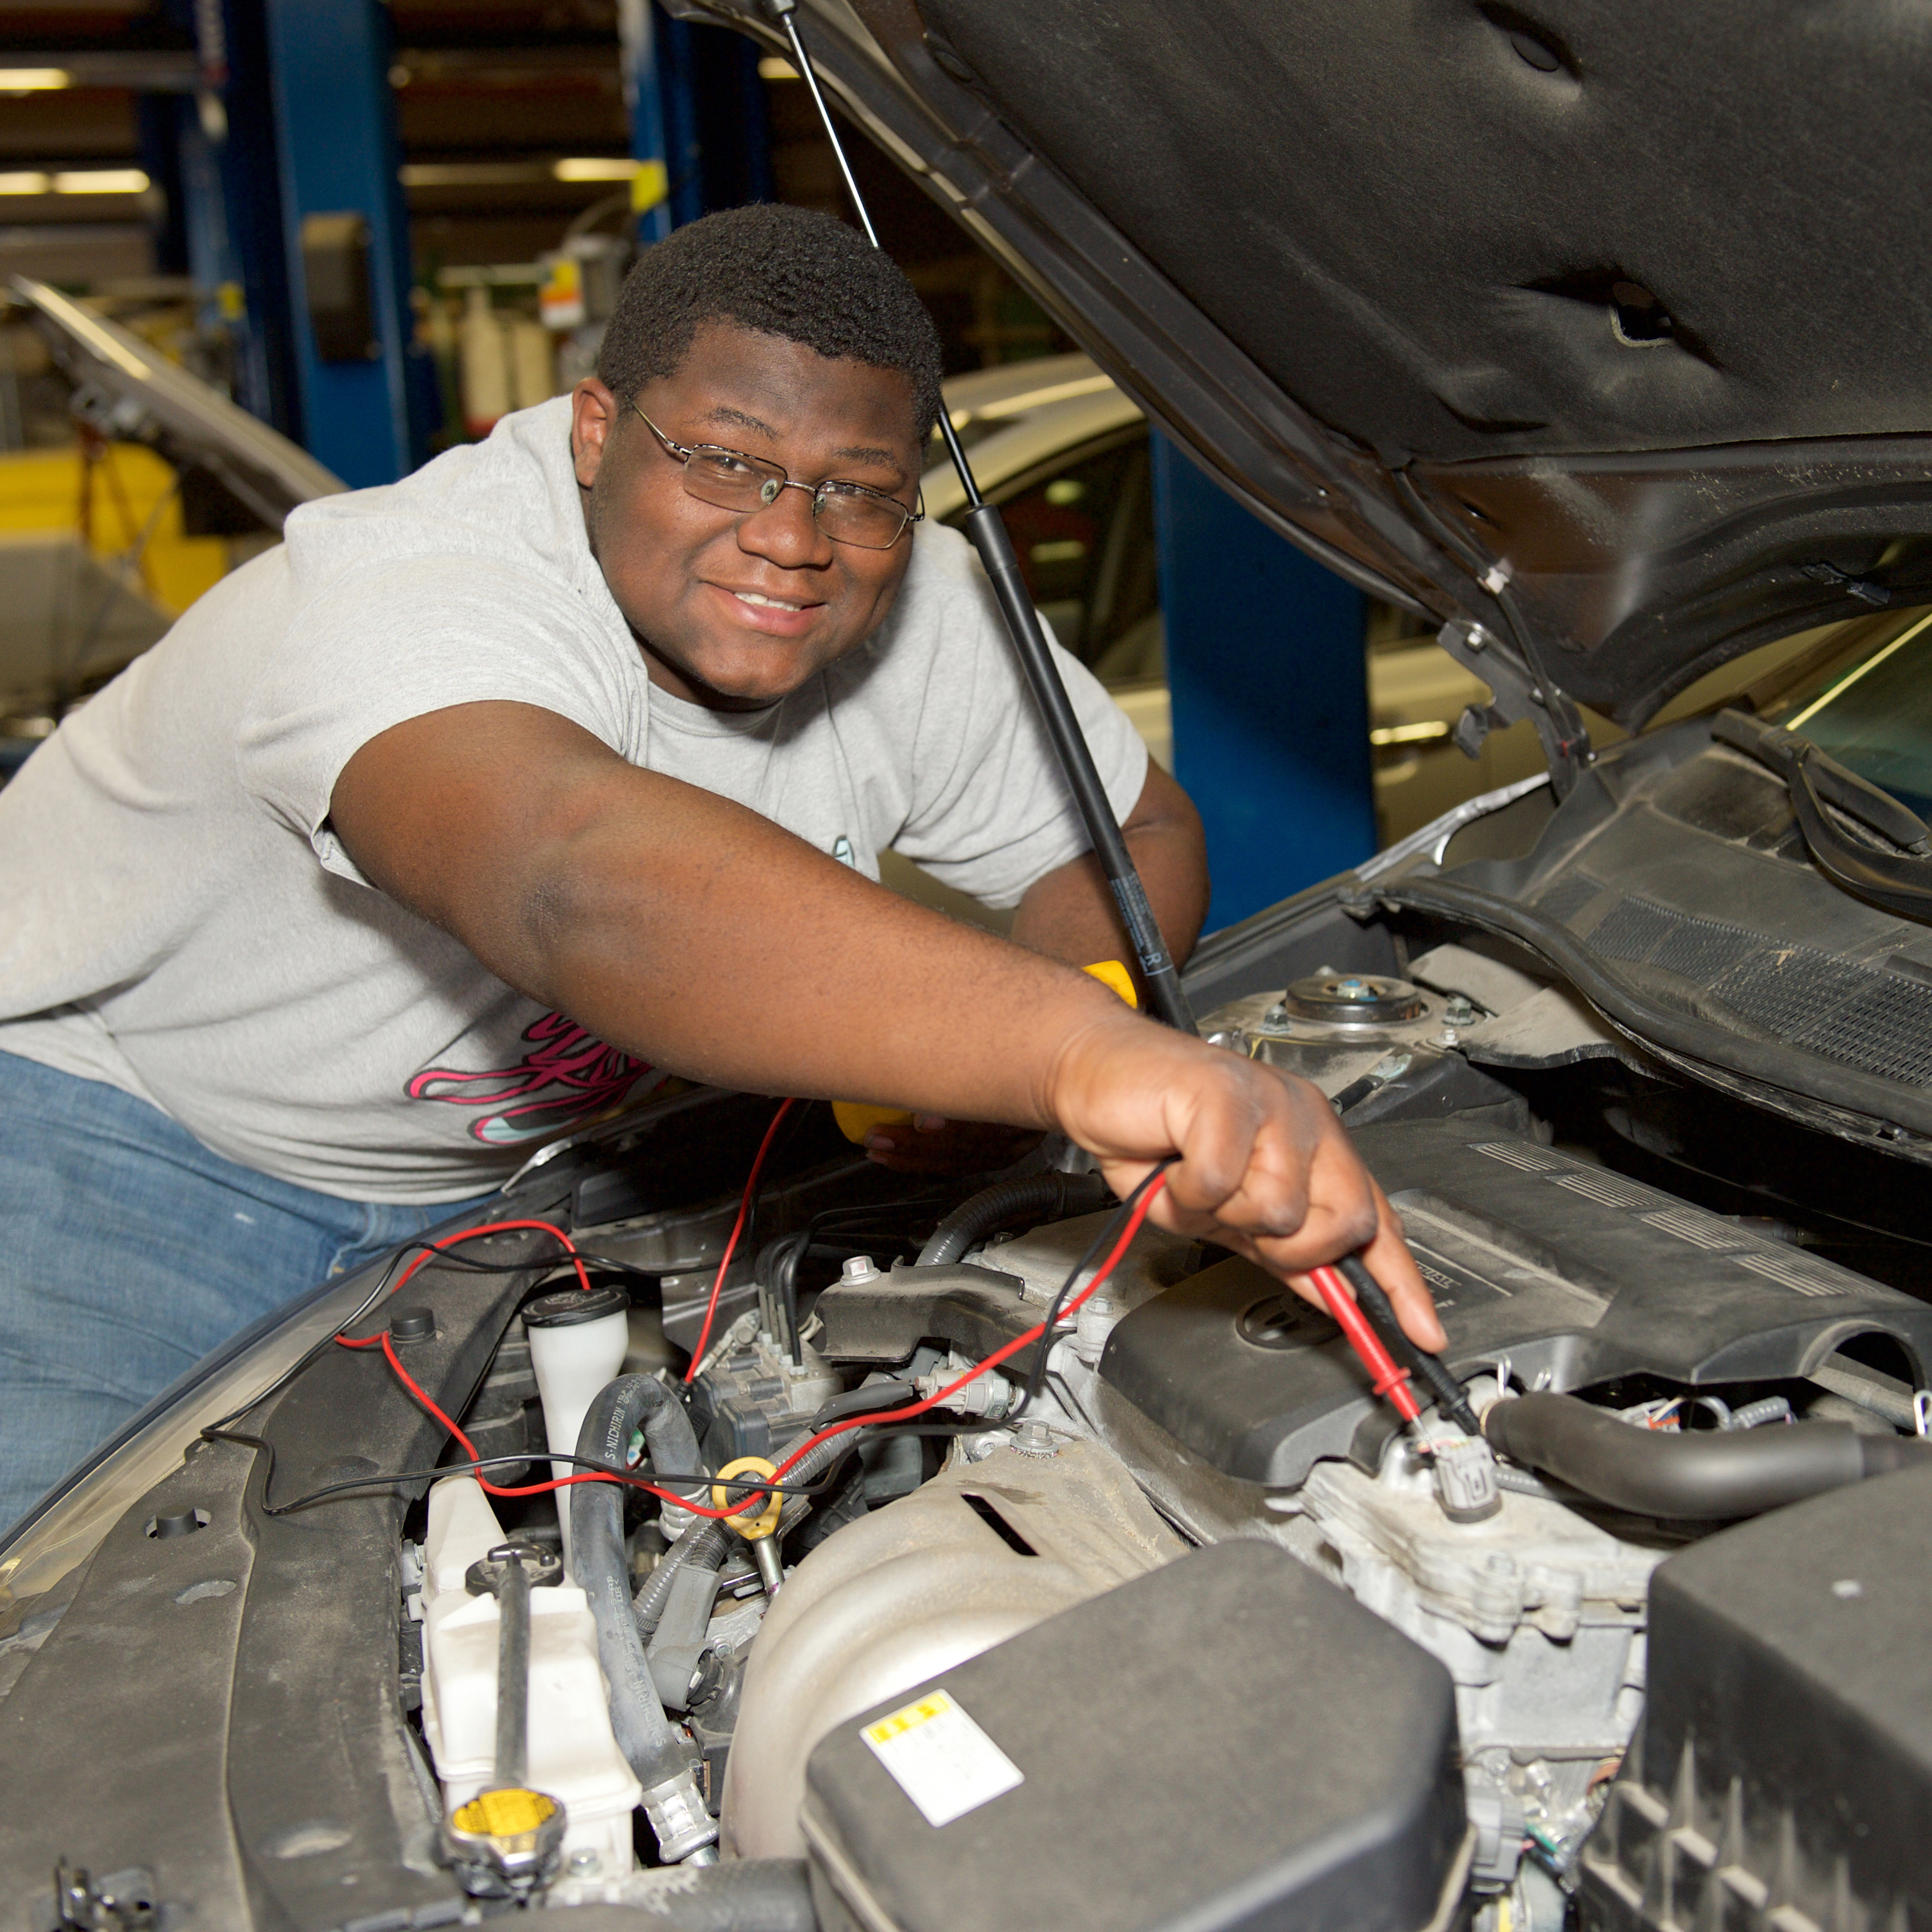 Auto student working on a car engine holding the red and black cords of an electrical meter to take a reading.